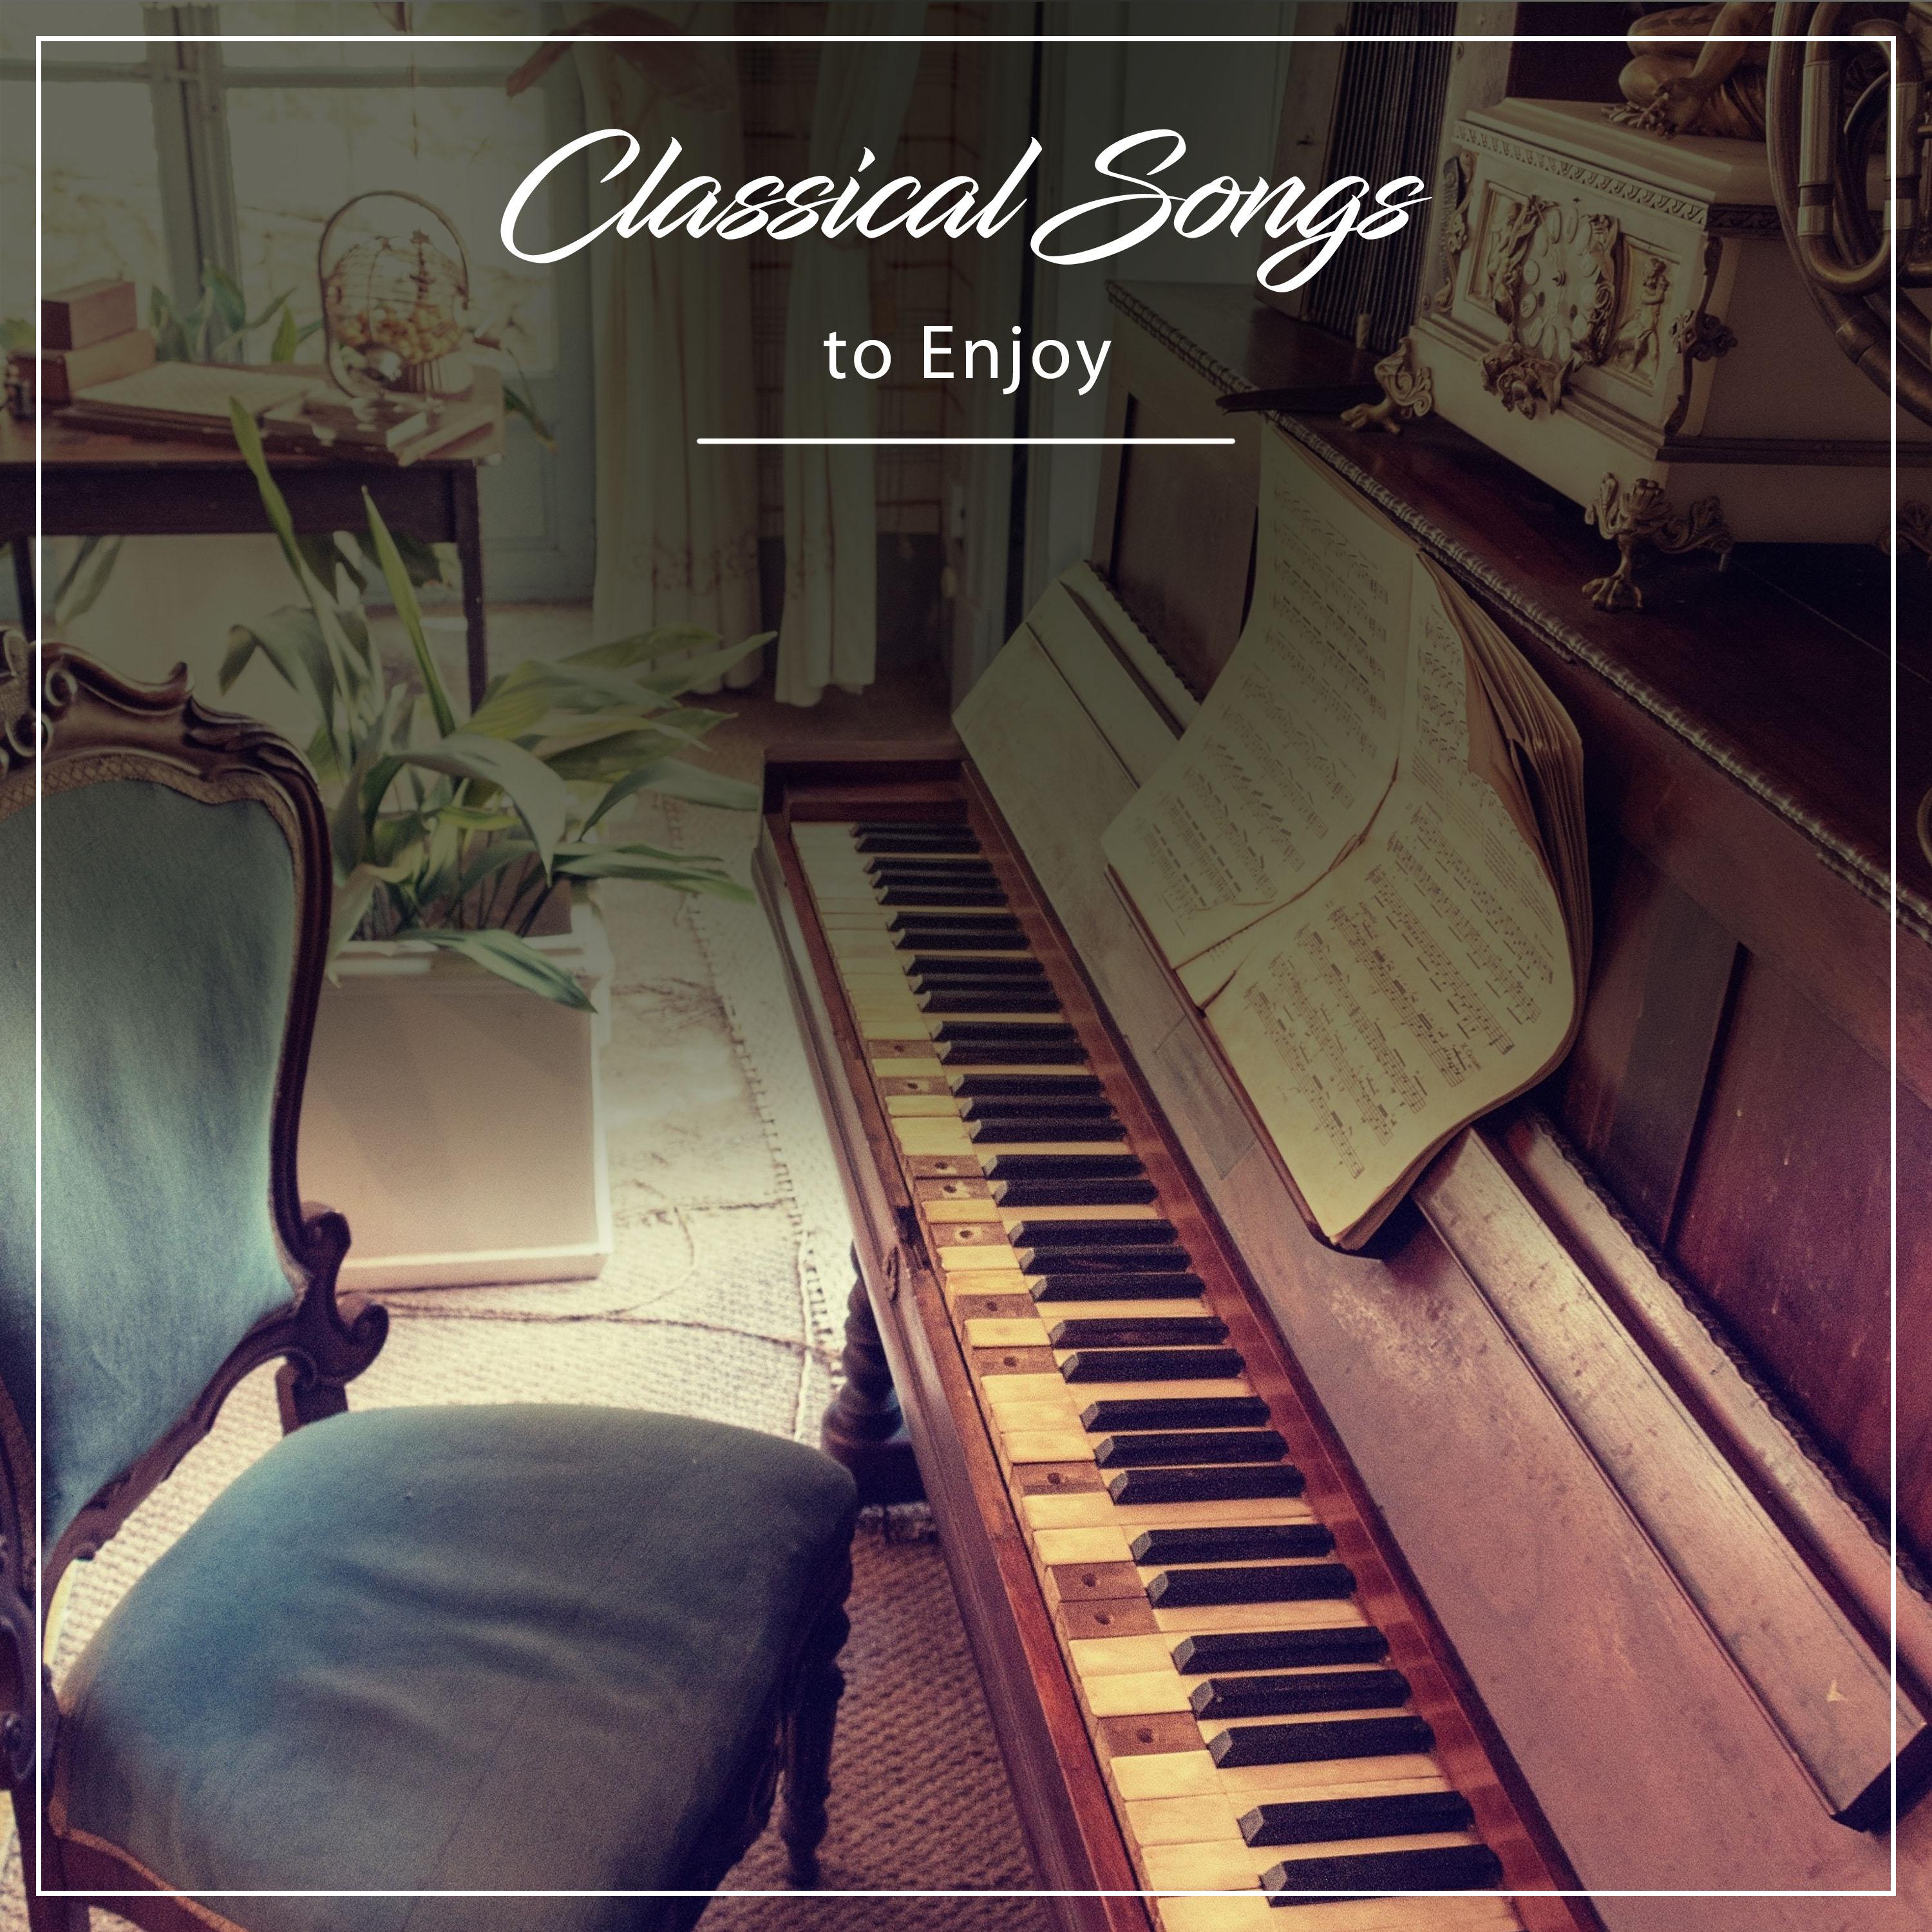 10 Marvellous Classical Songs to Enjoy